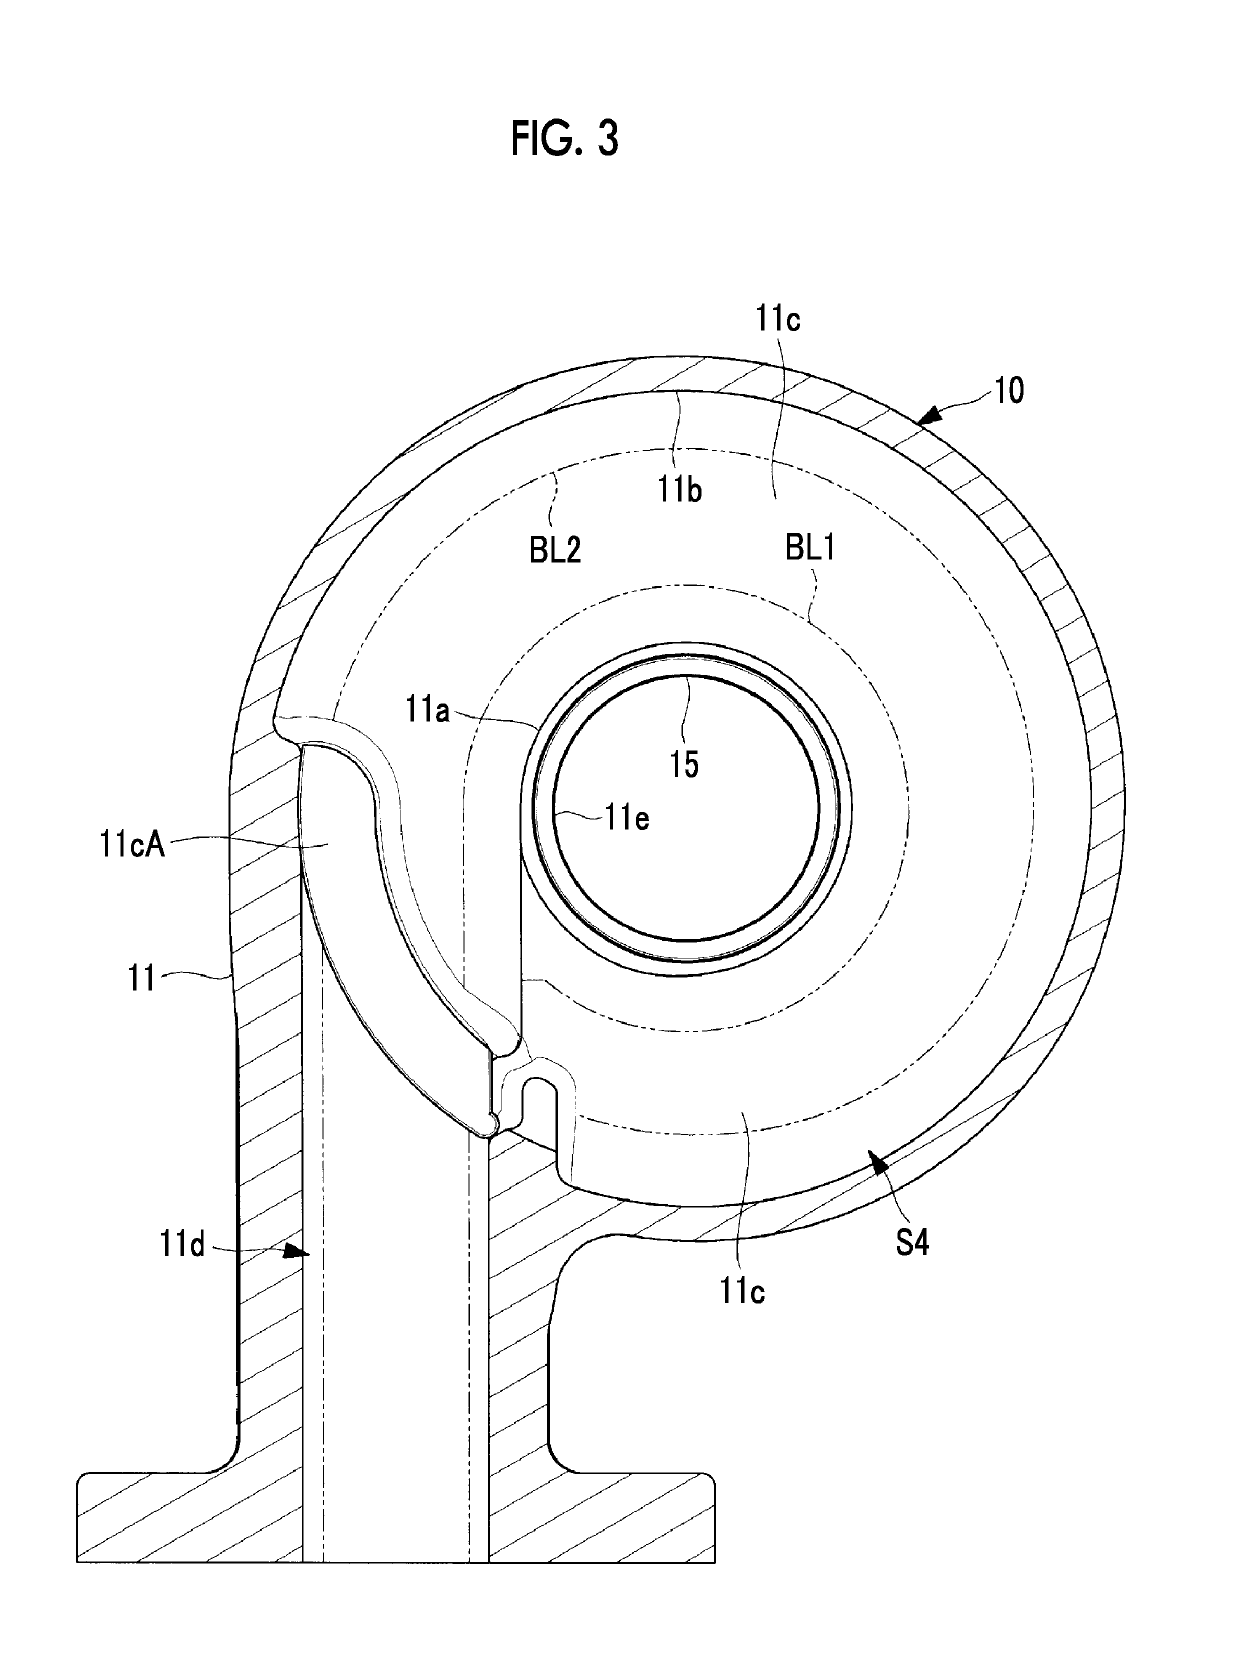 Turbine housing and turbo charger provided with same